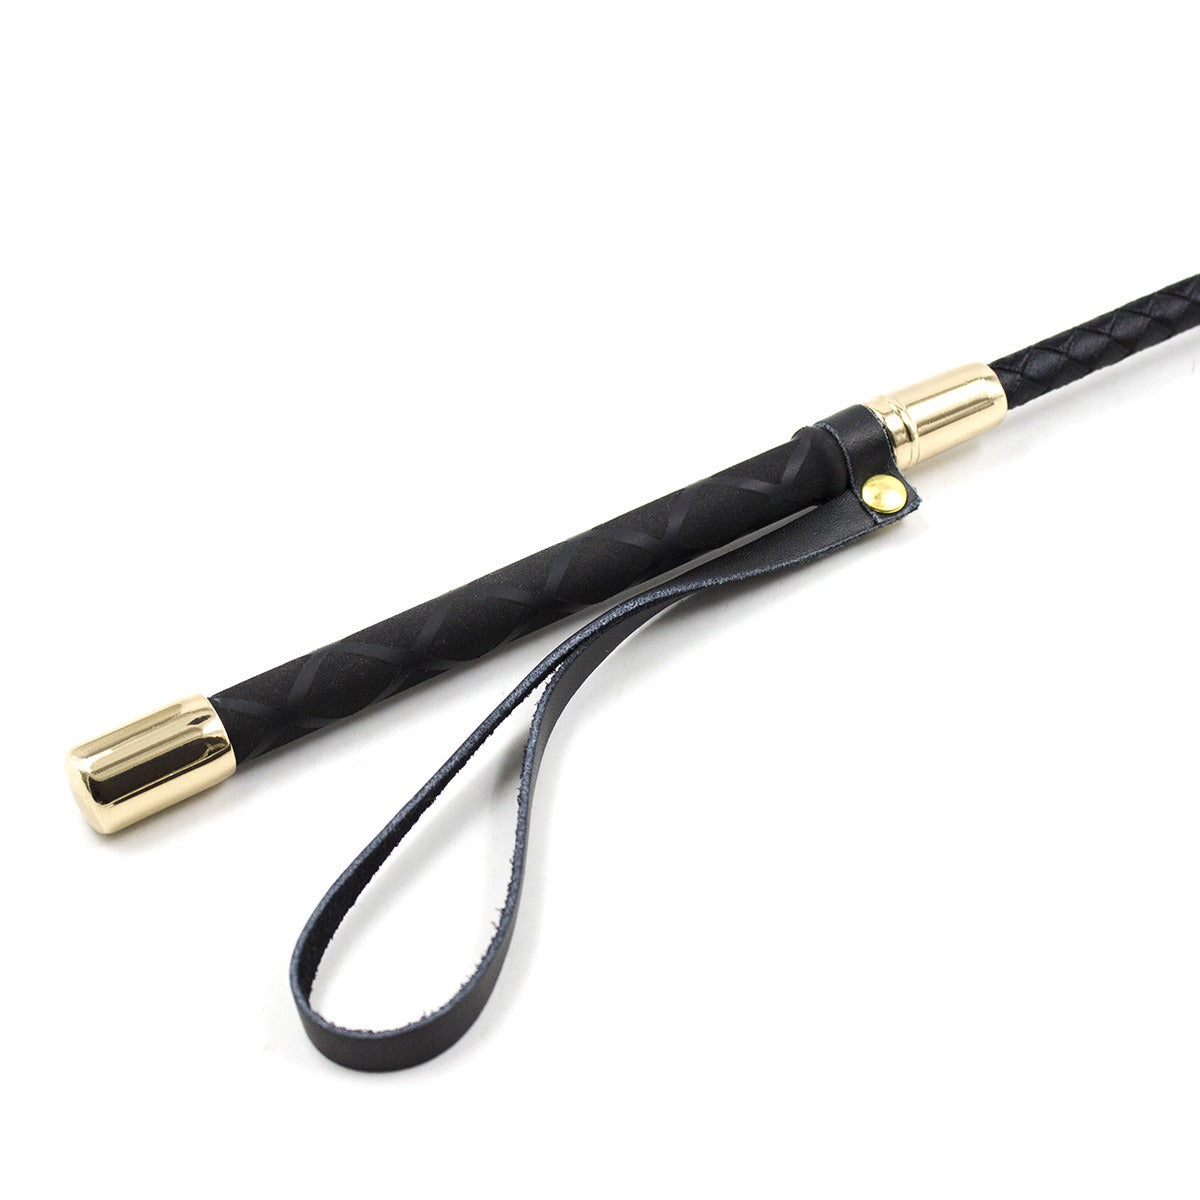 Conditioning Leather Whip for BDSM Play